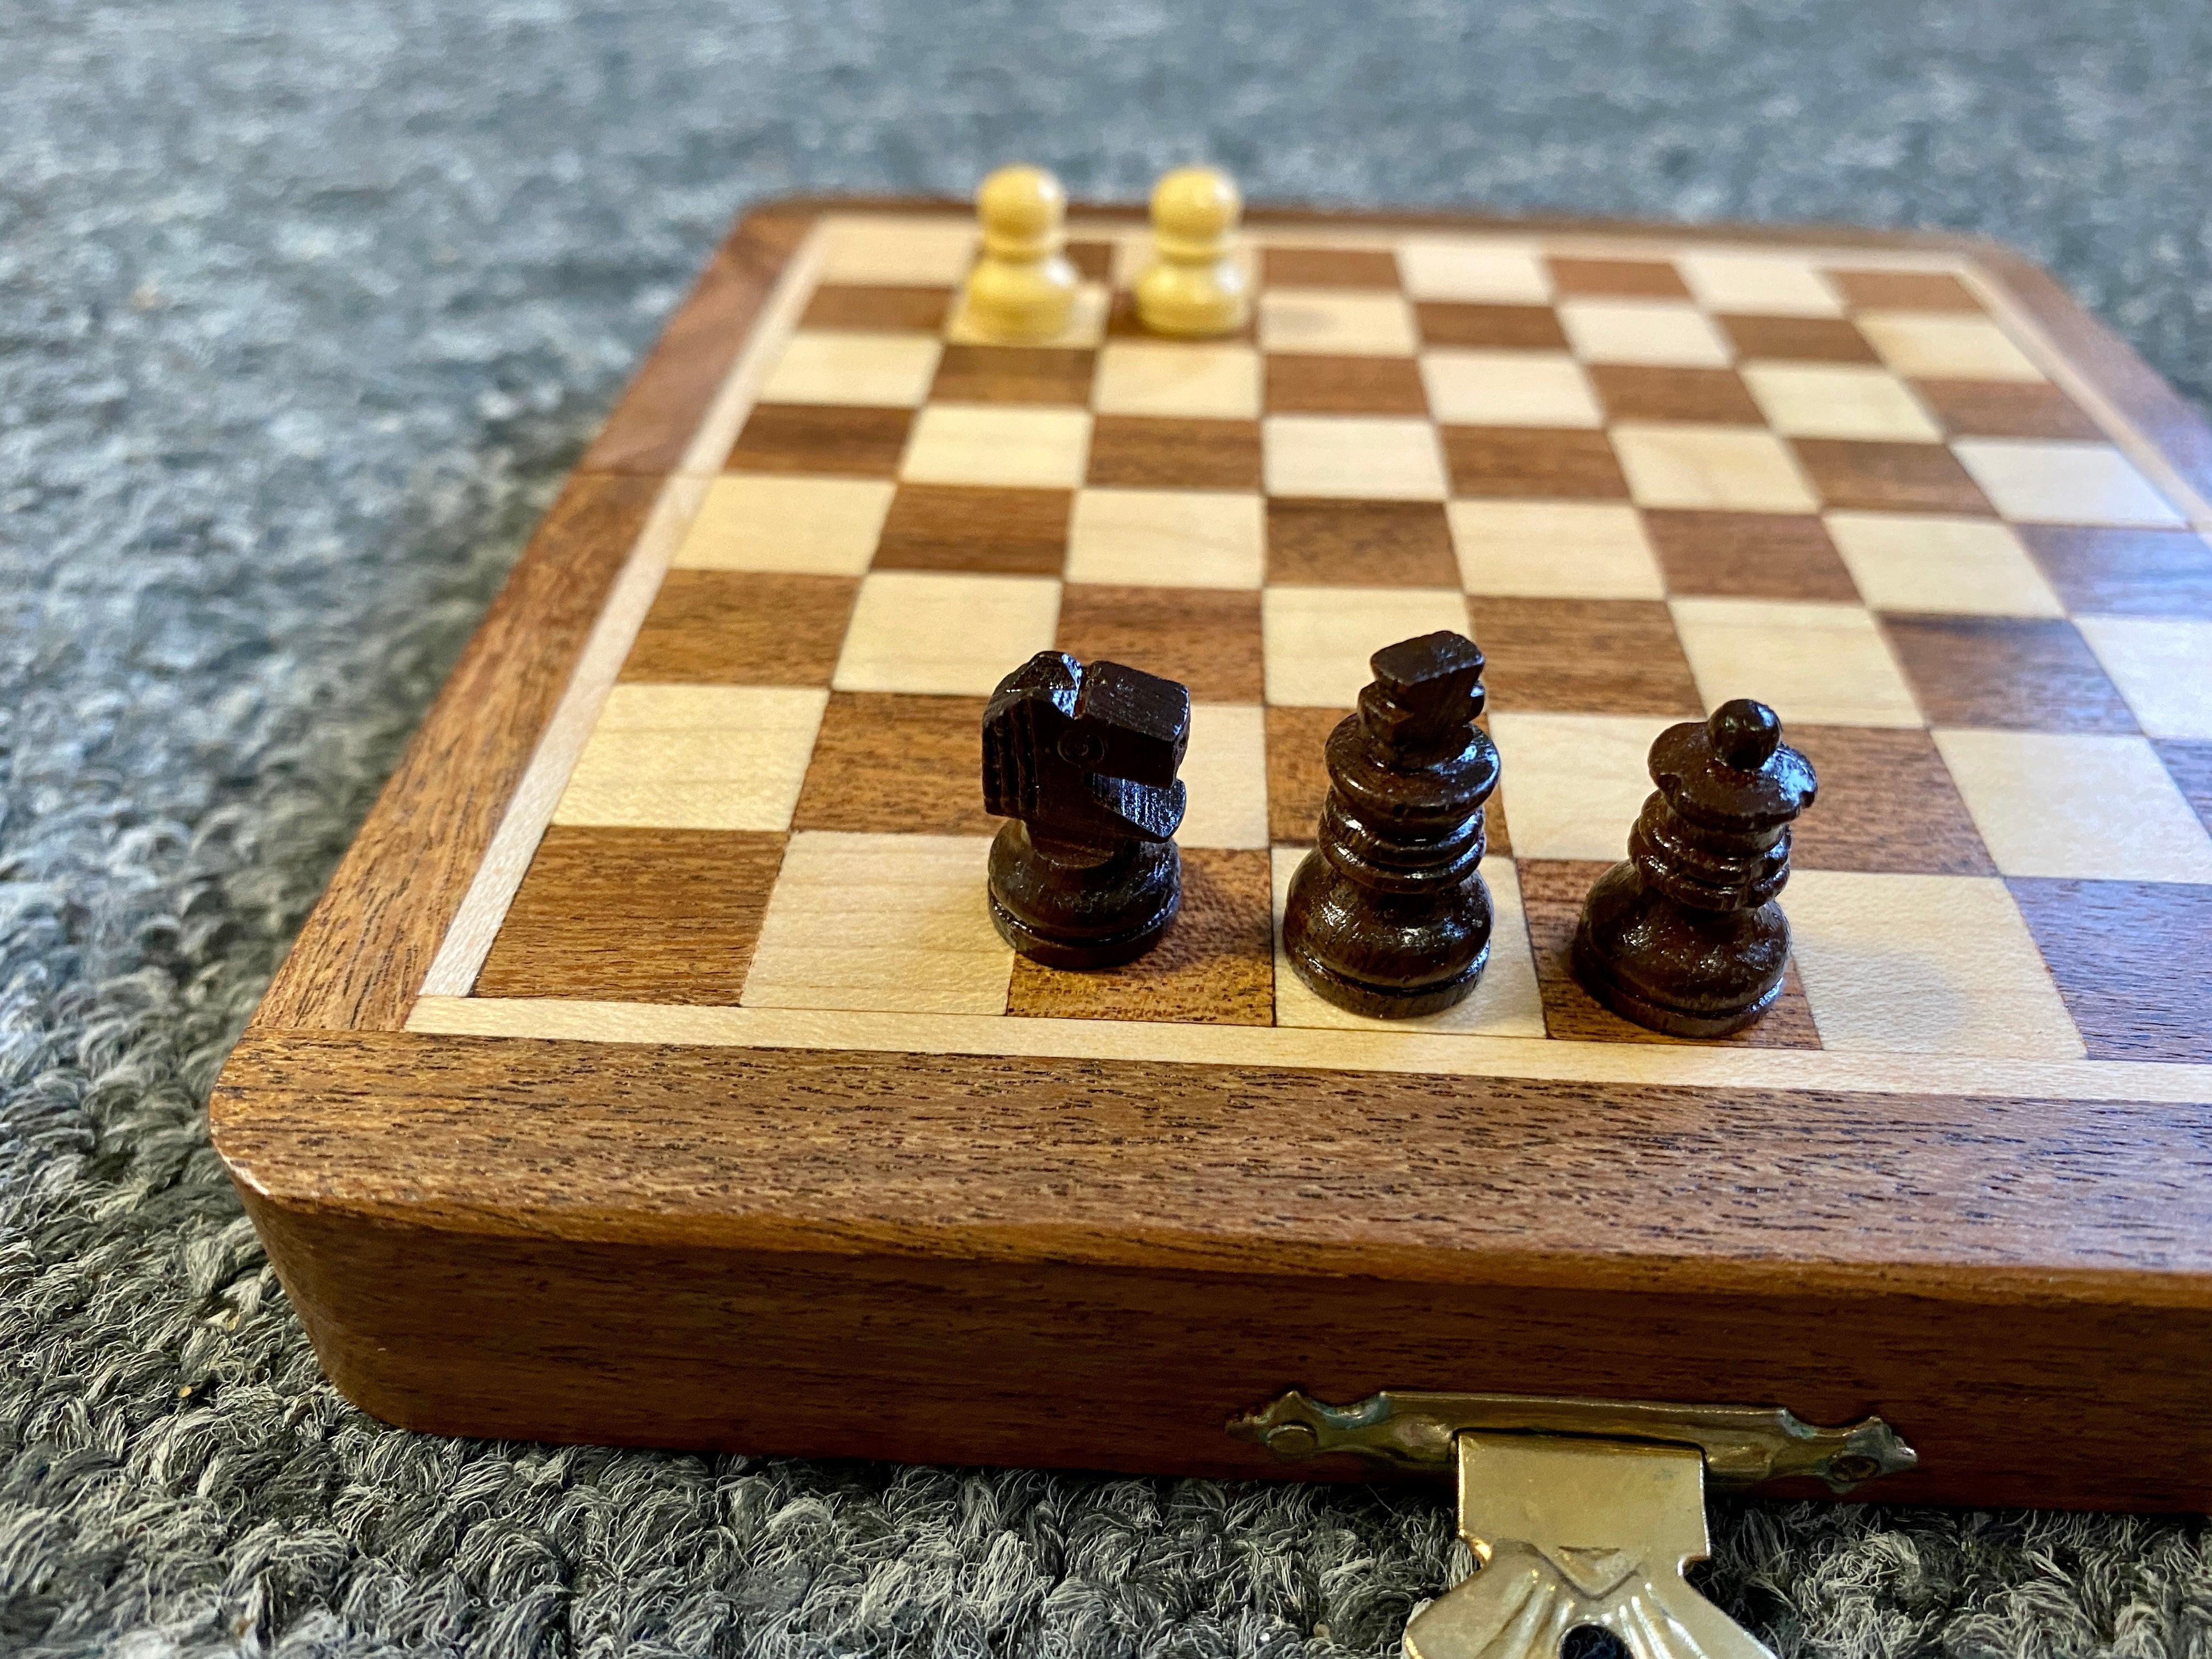 Mini Chess Set - Travel chess set - Magnetic Wooden Chess Sets with Board 5" or 7" - gift for him - Christmas gift for chess lovers